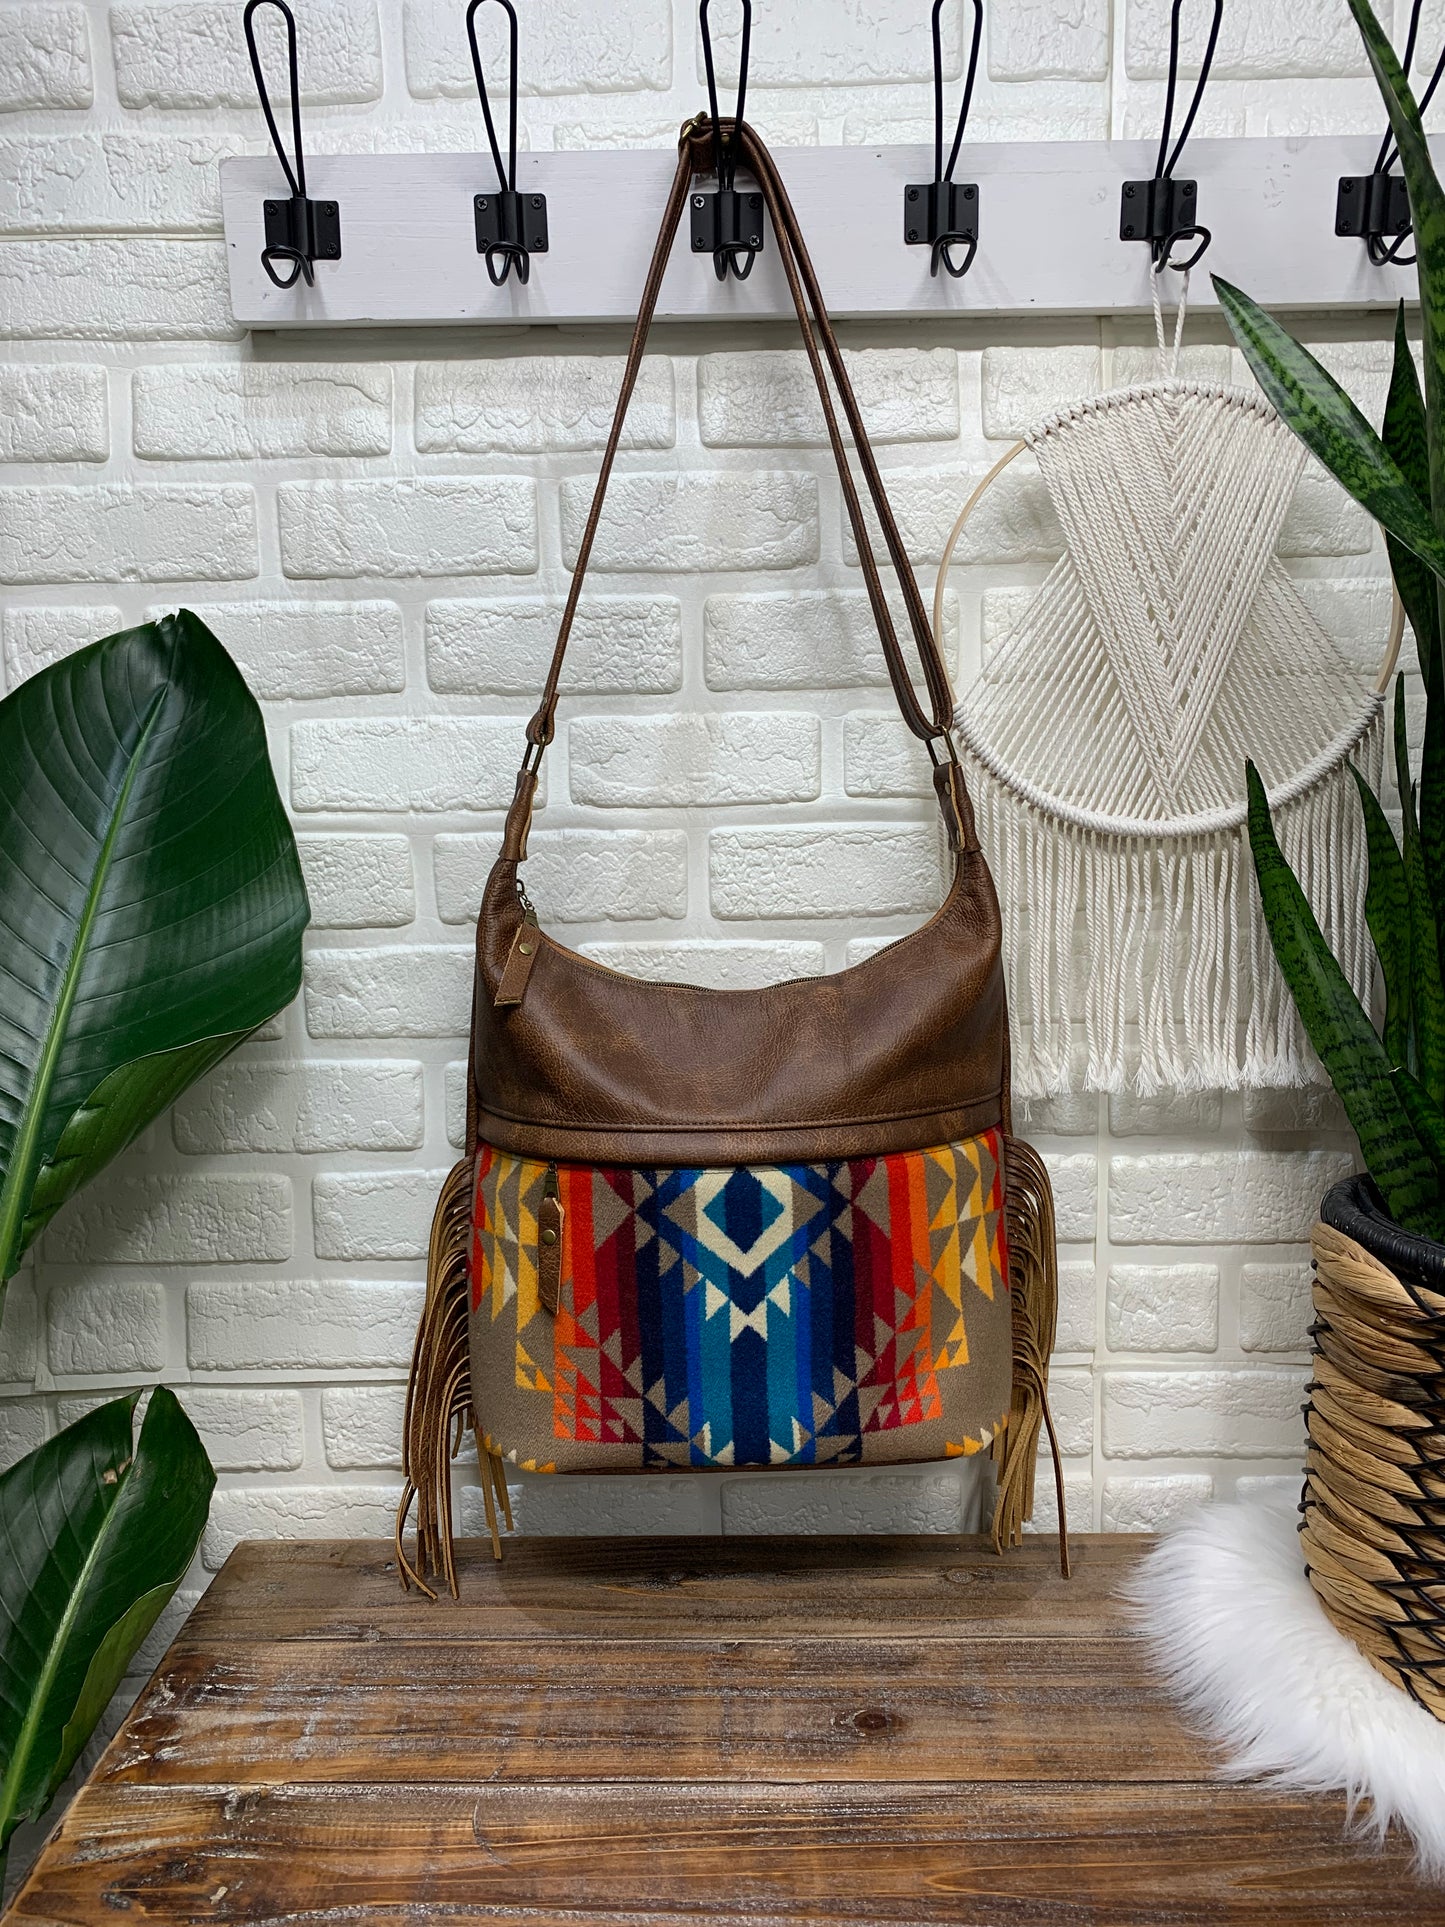 Bucket hobo bag crossbody in Pilot Rock wool and saddle brown leather with Fringe